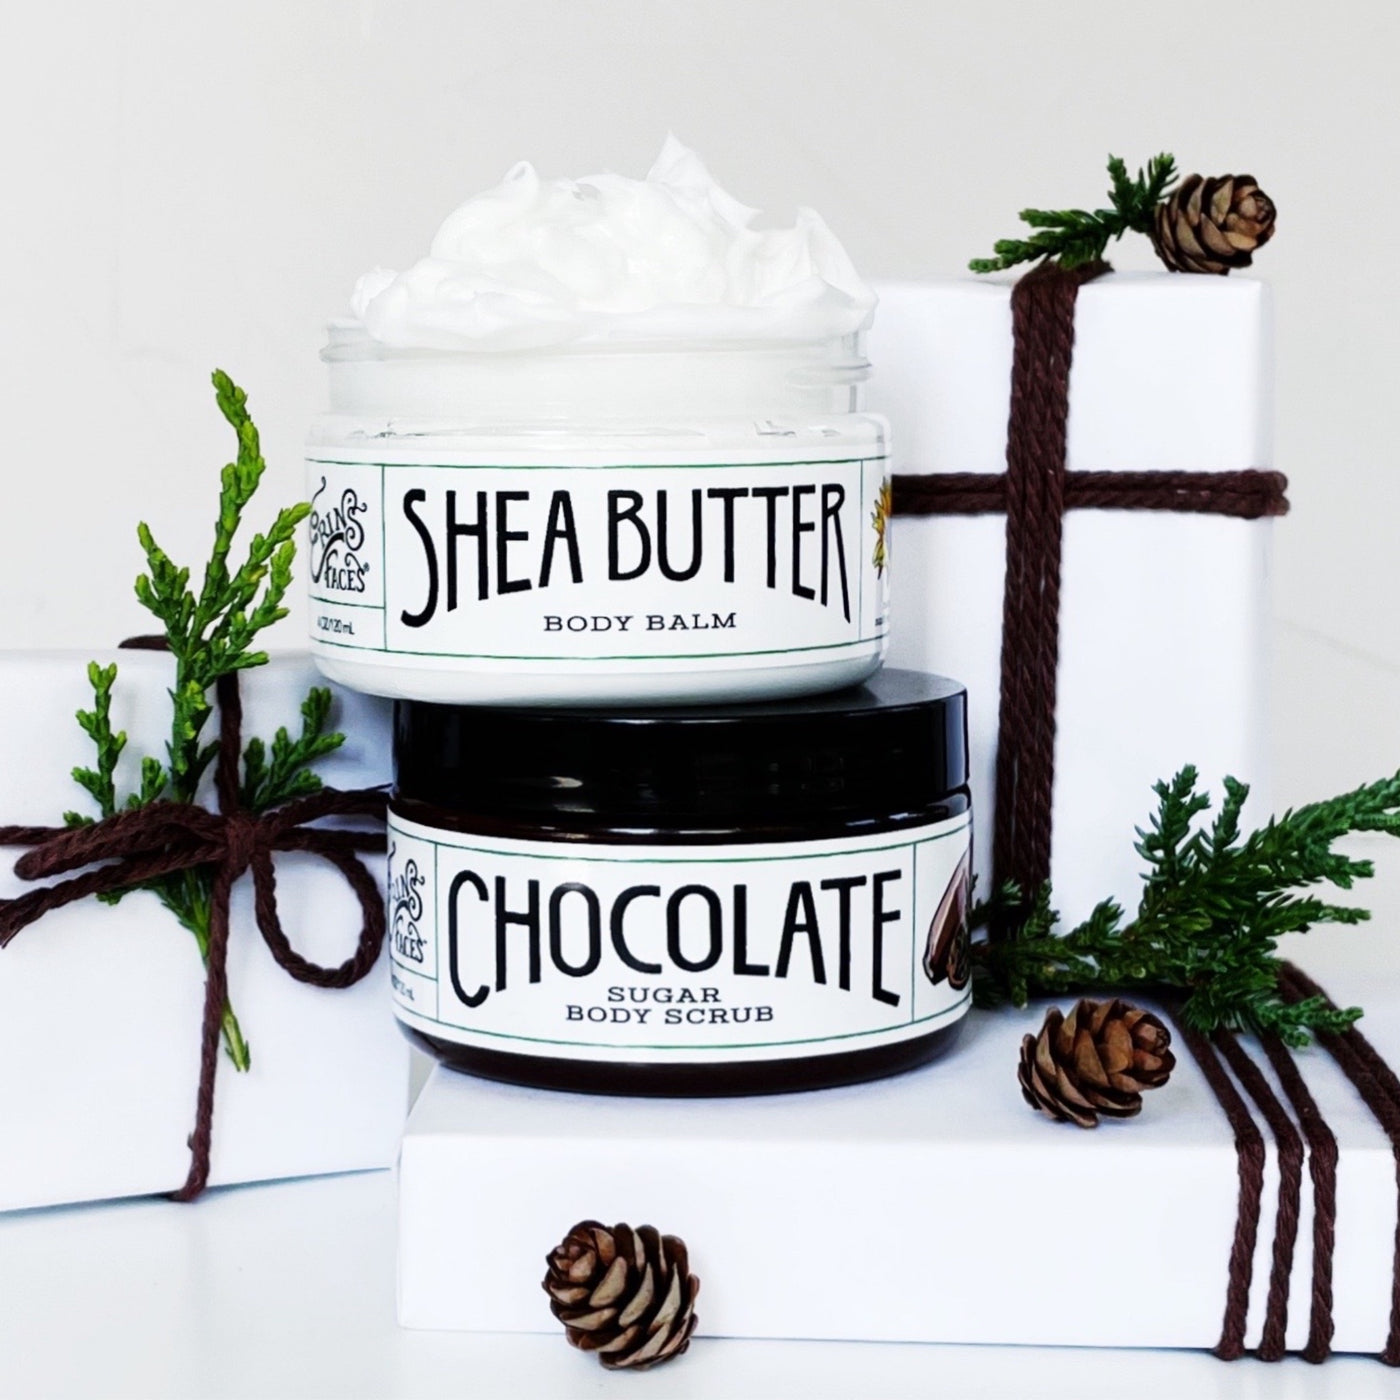 erin's faces shea butter body balm and chocolate sugar body scrub - the body balm is whipped so you can see it - surrounded by white paper packages tied up with brown string, bits of cedar and tiny pine cones